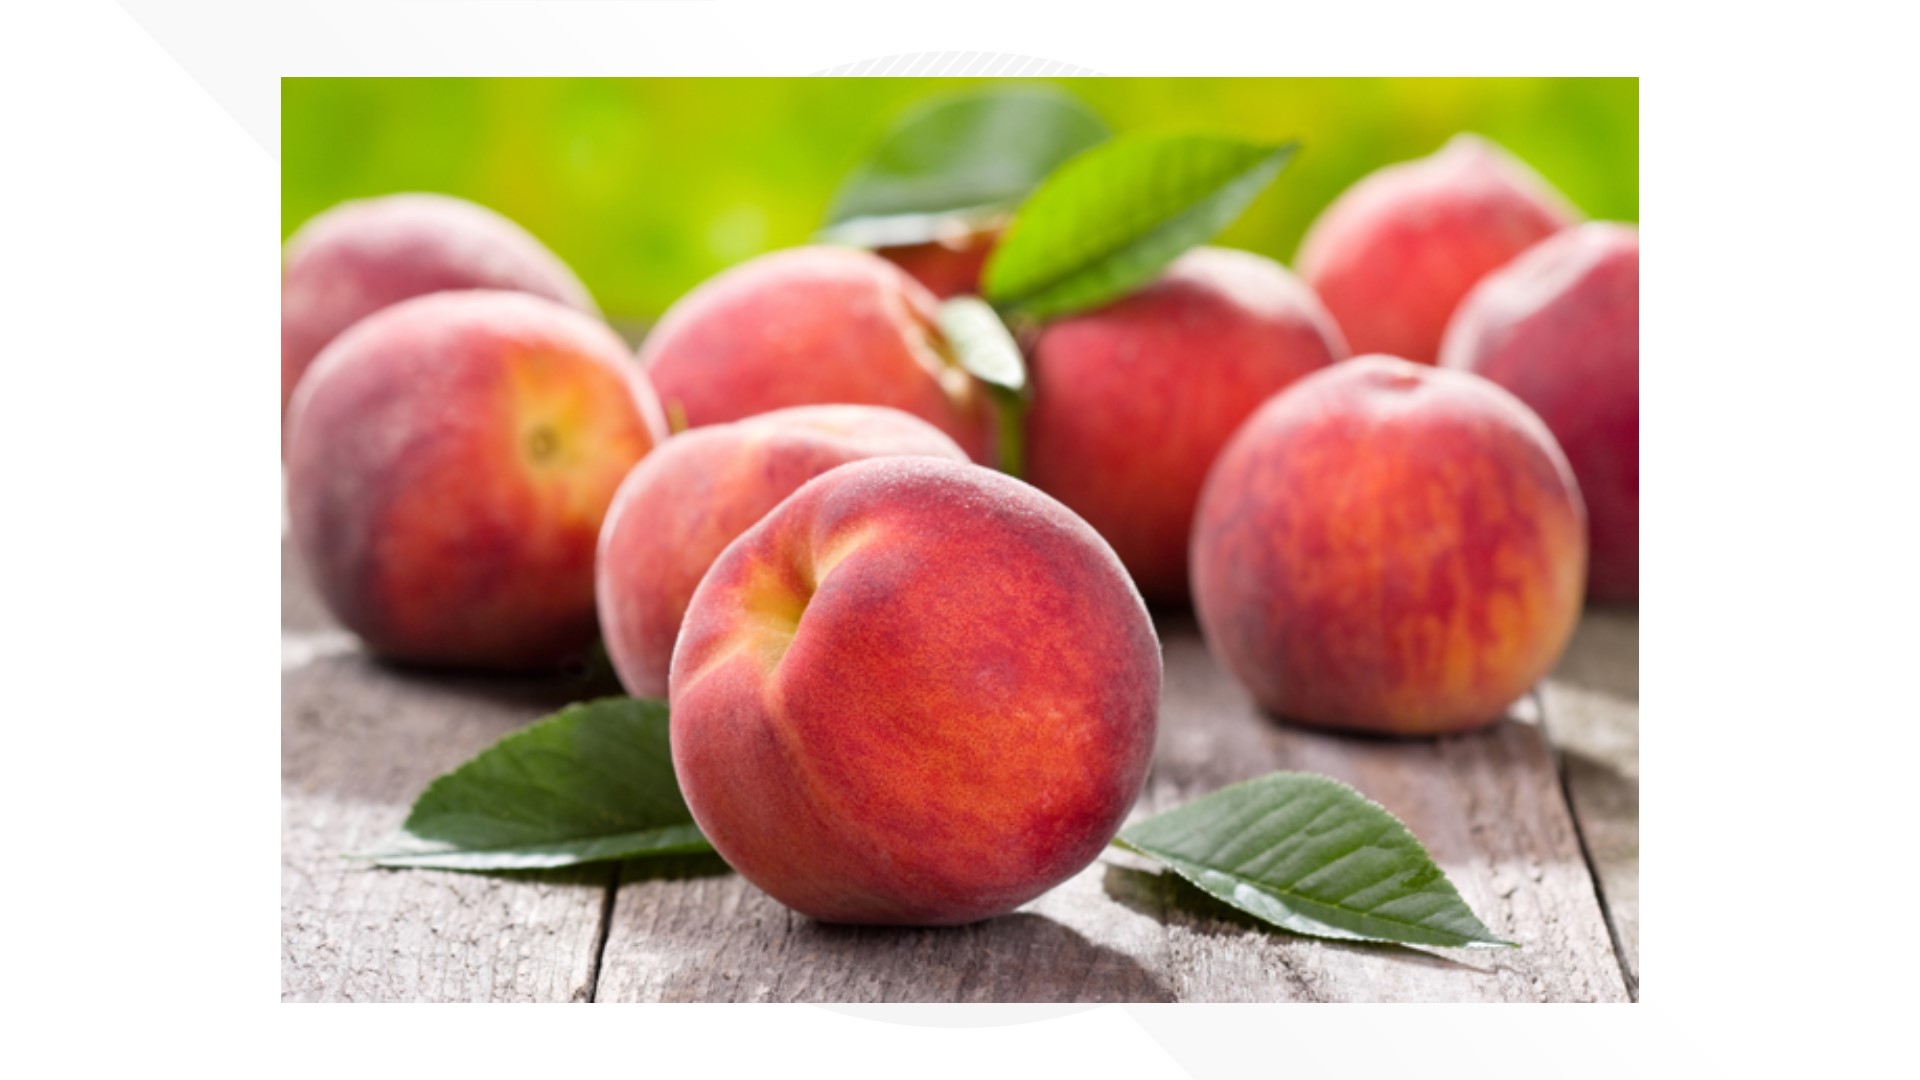 According to Talbott Farms, the colder weather we've had is perfect for peaches at this stage in their development